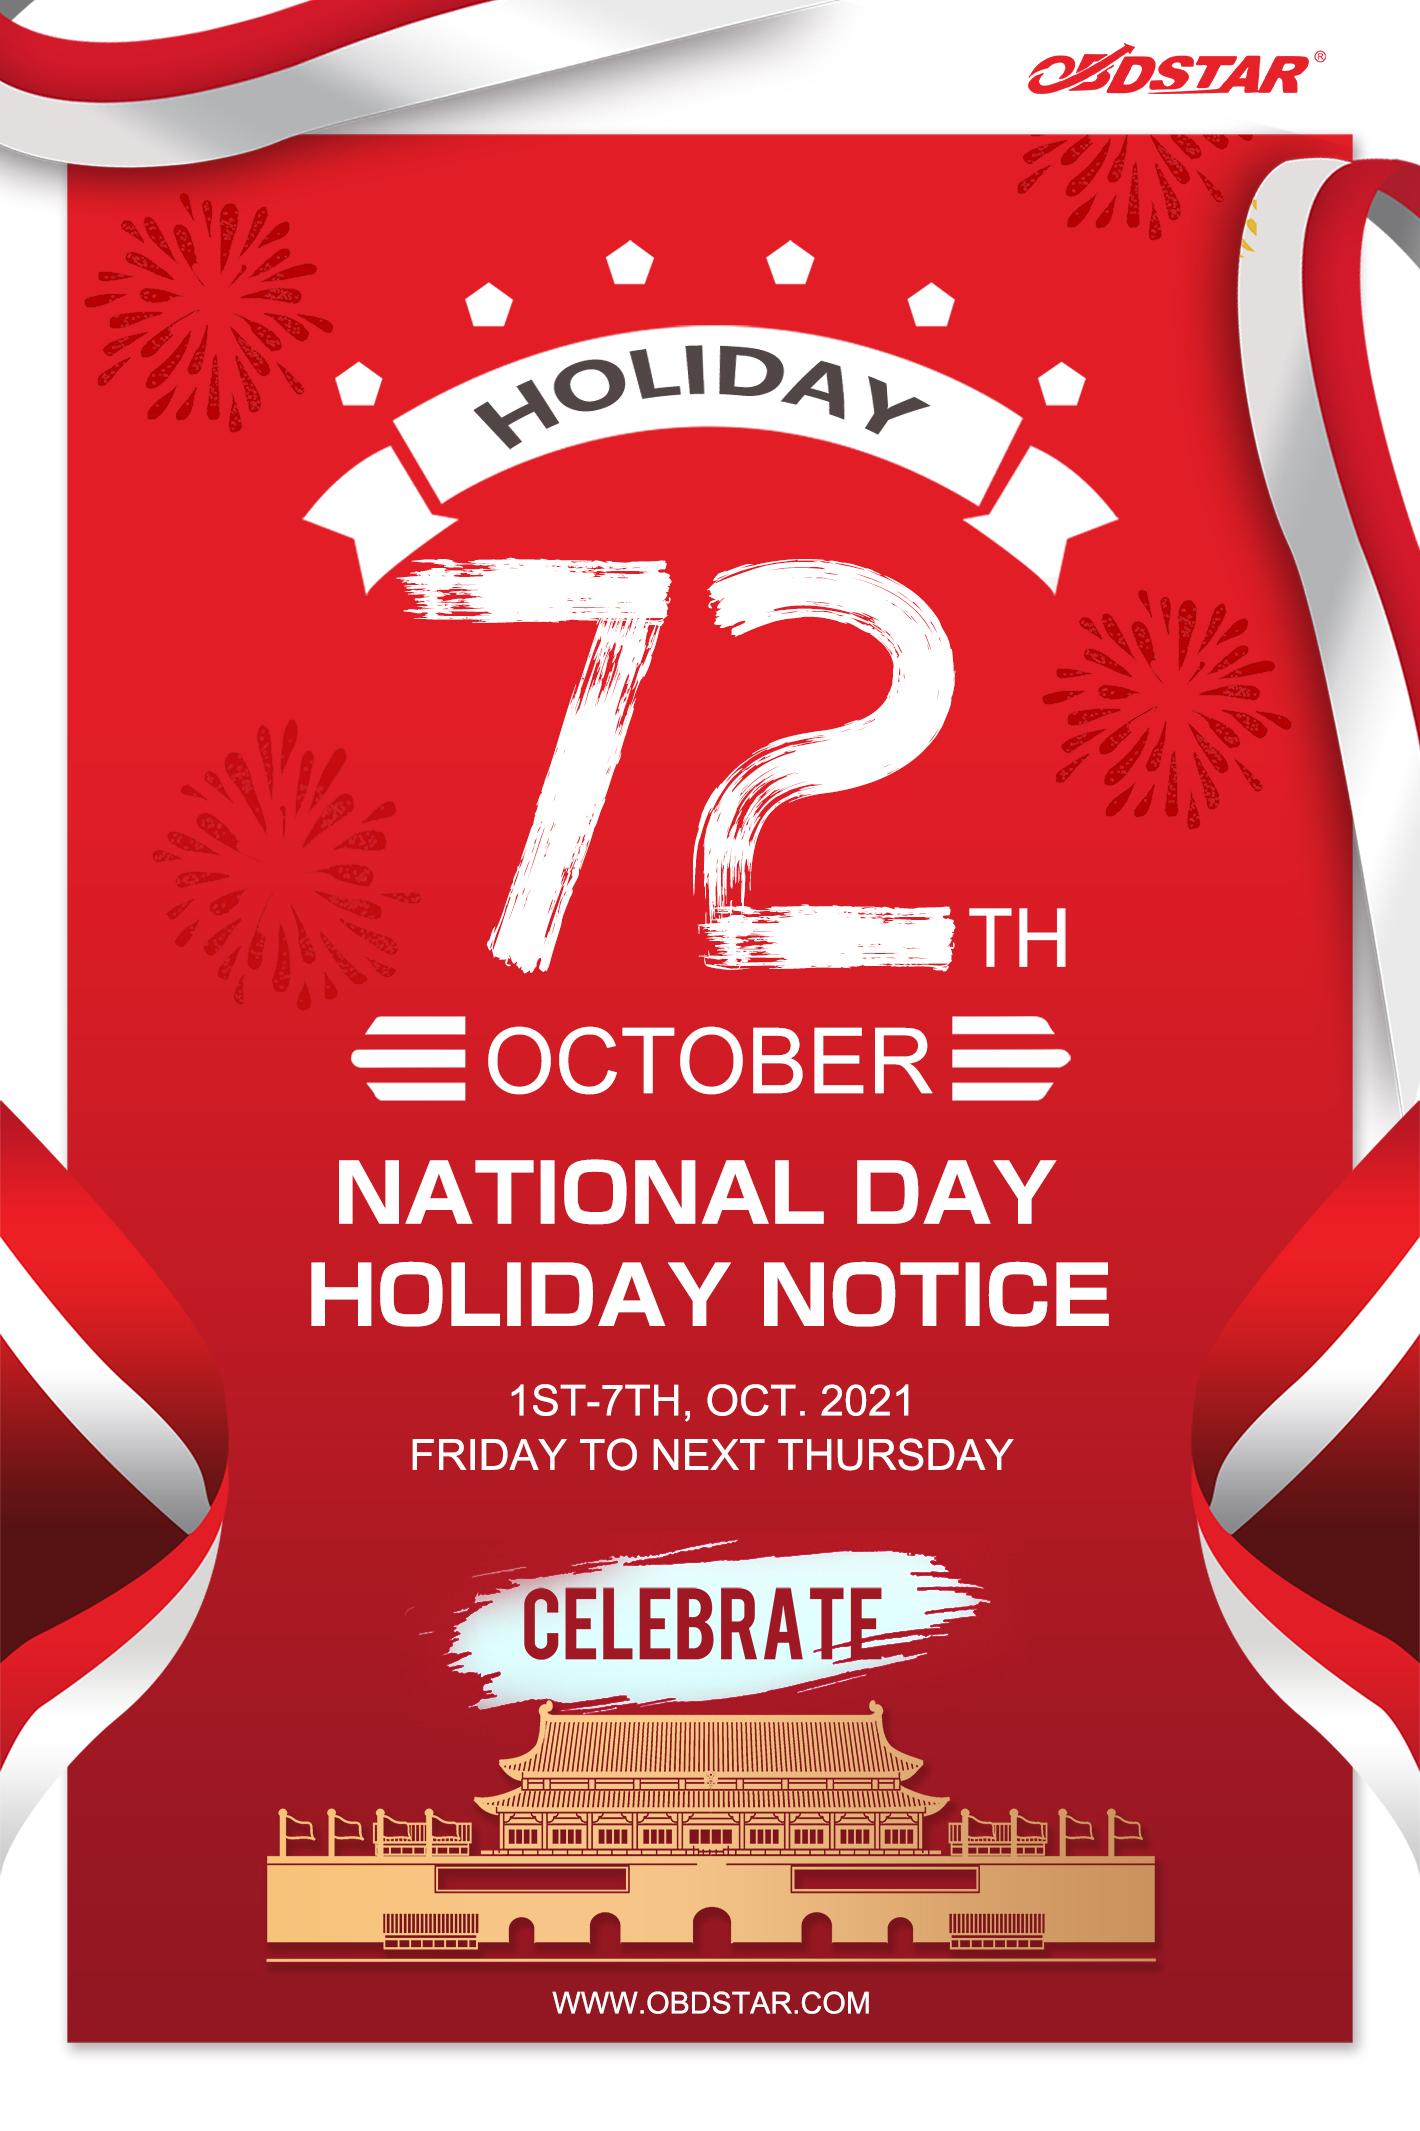 2021 National Day Holiday Notice